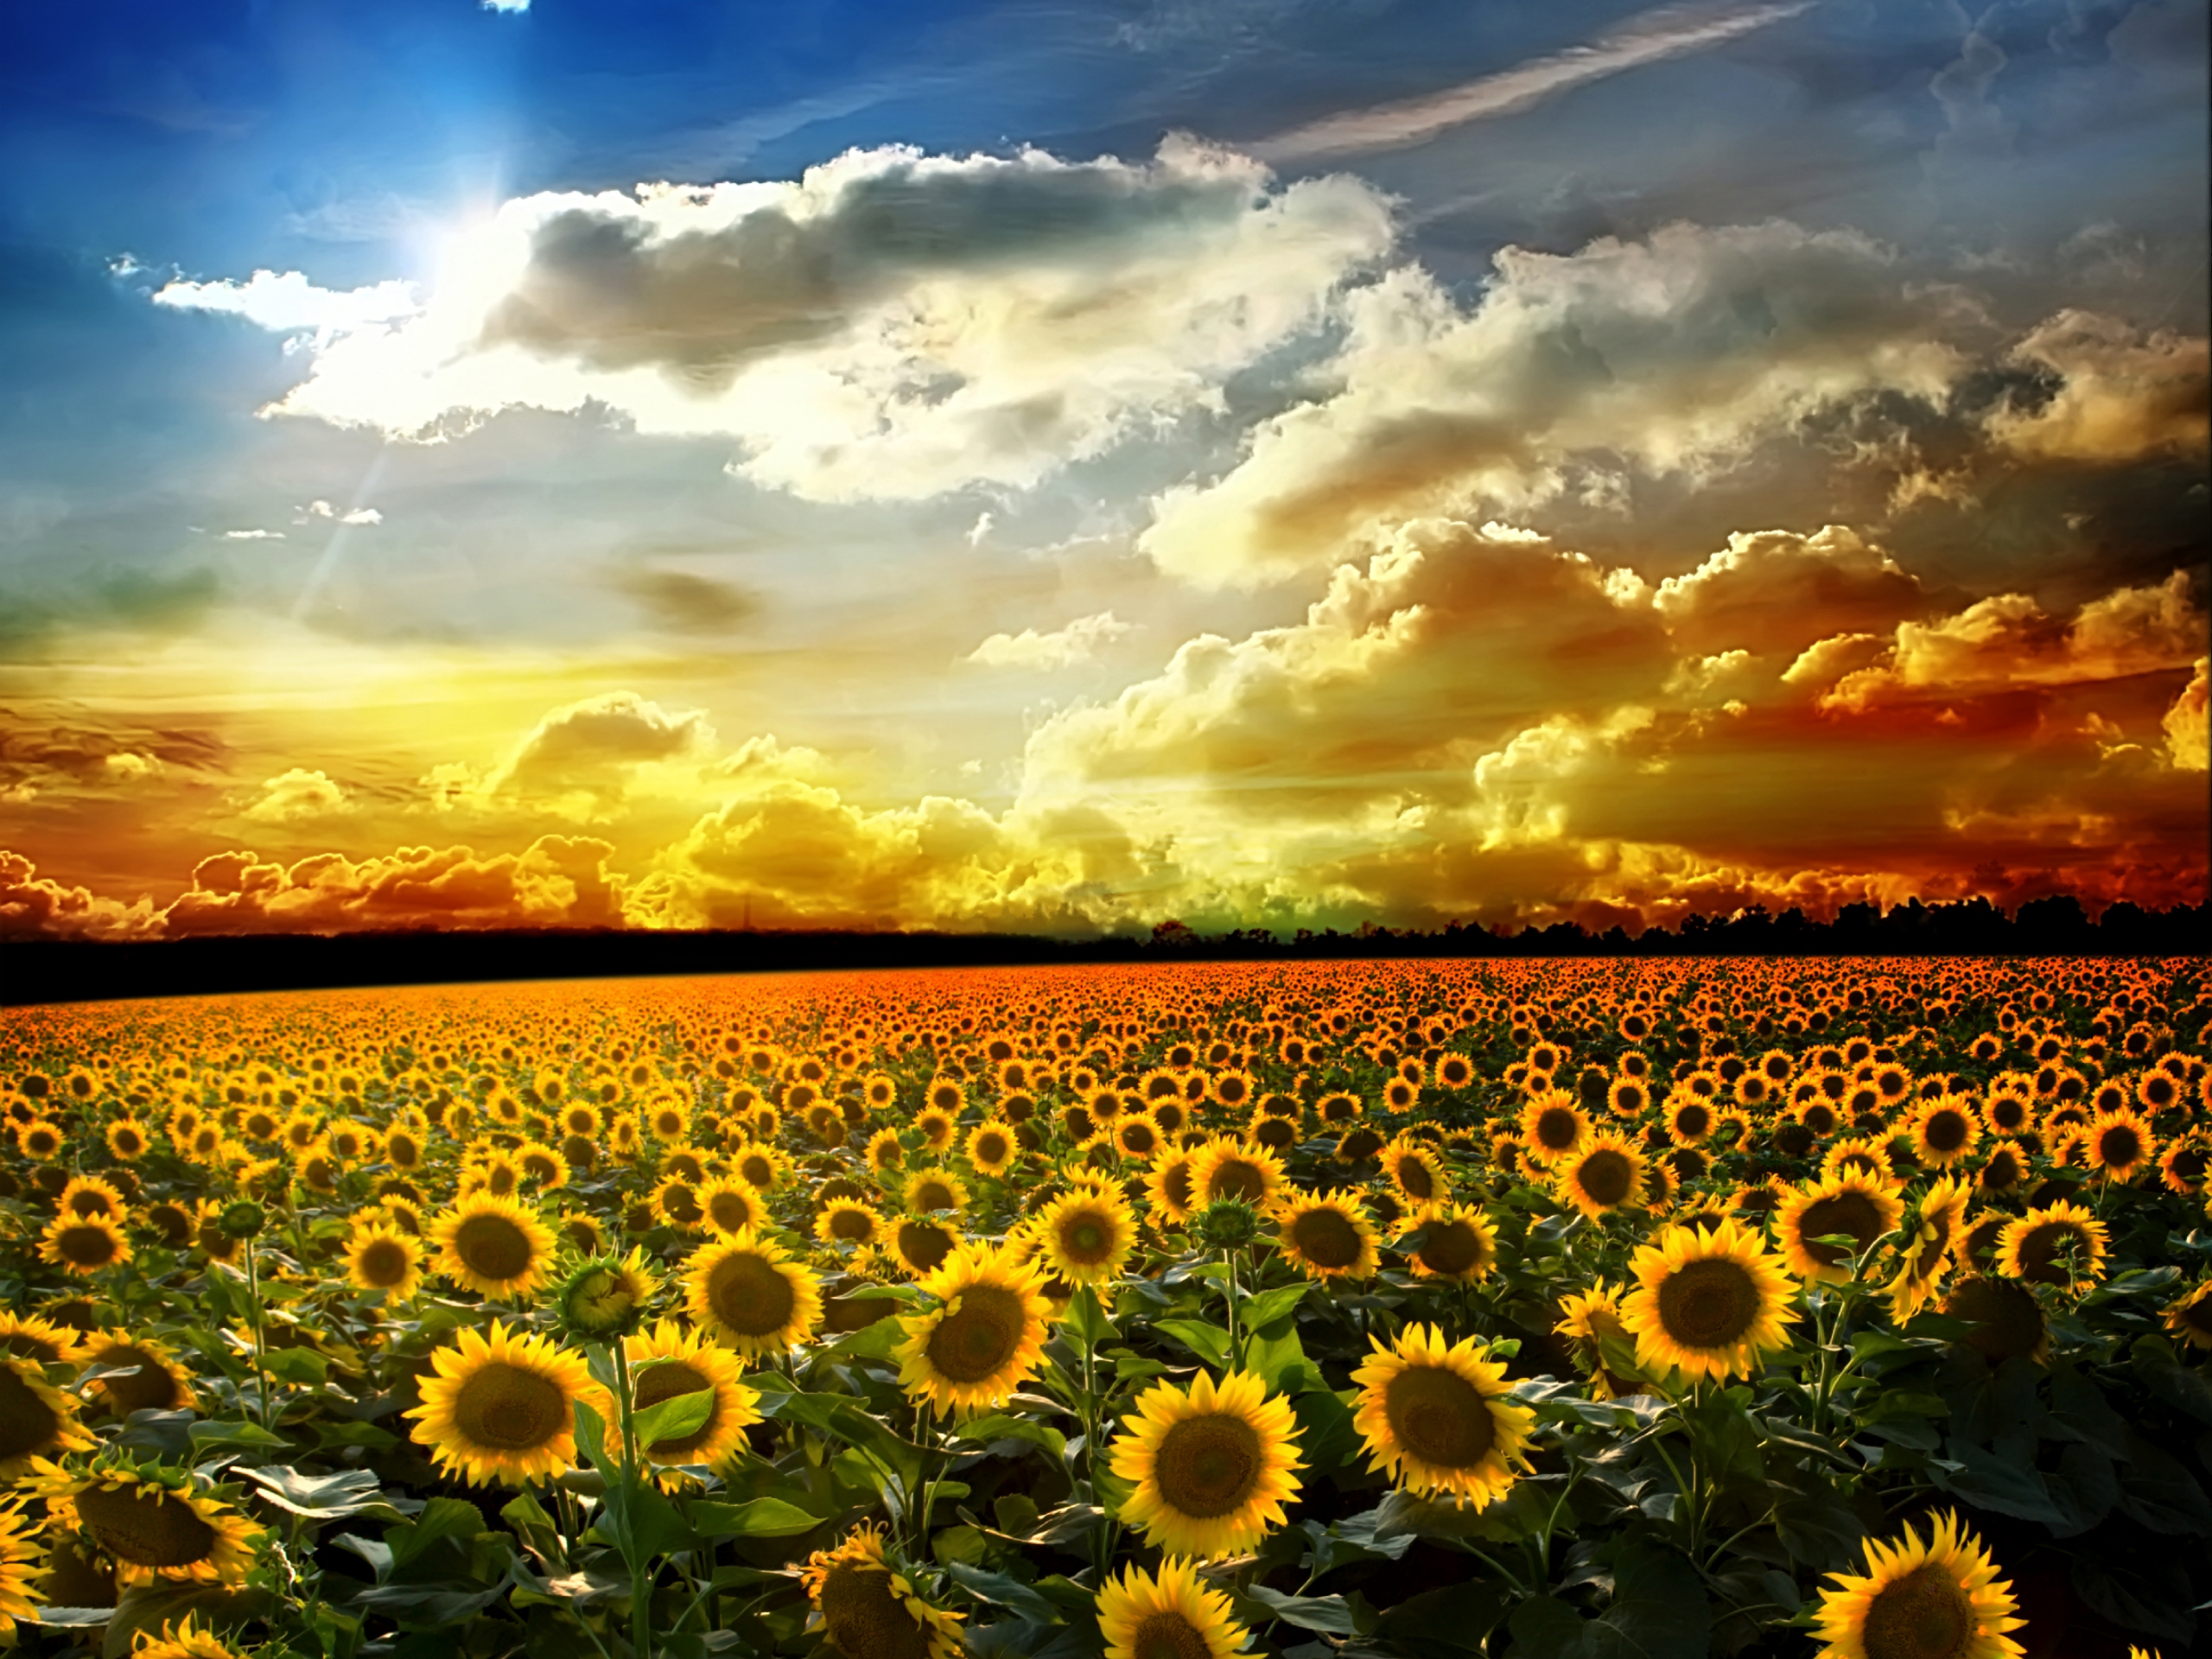 sunflower images free